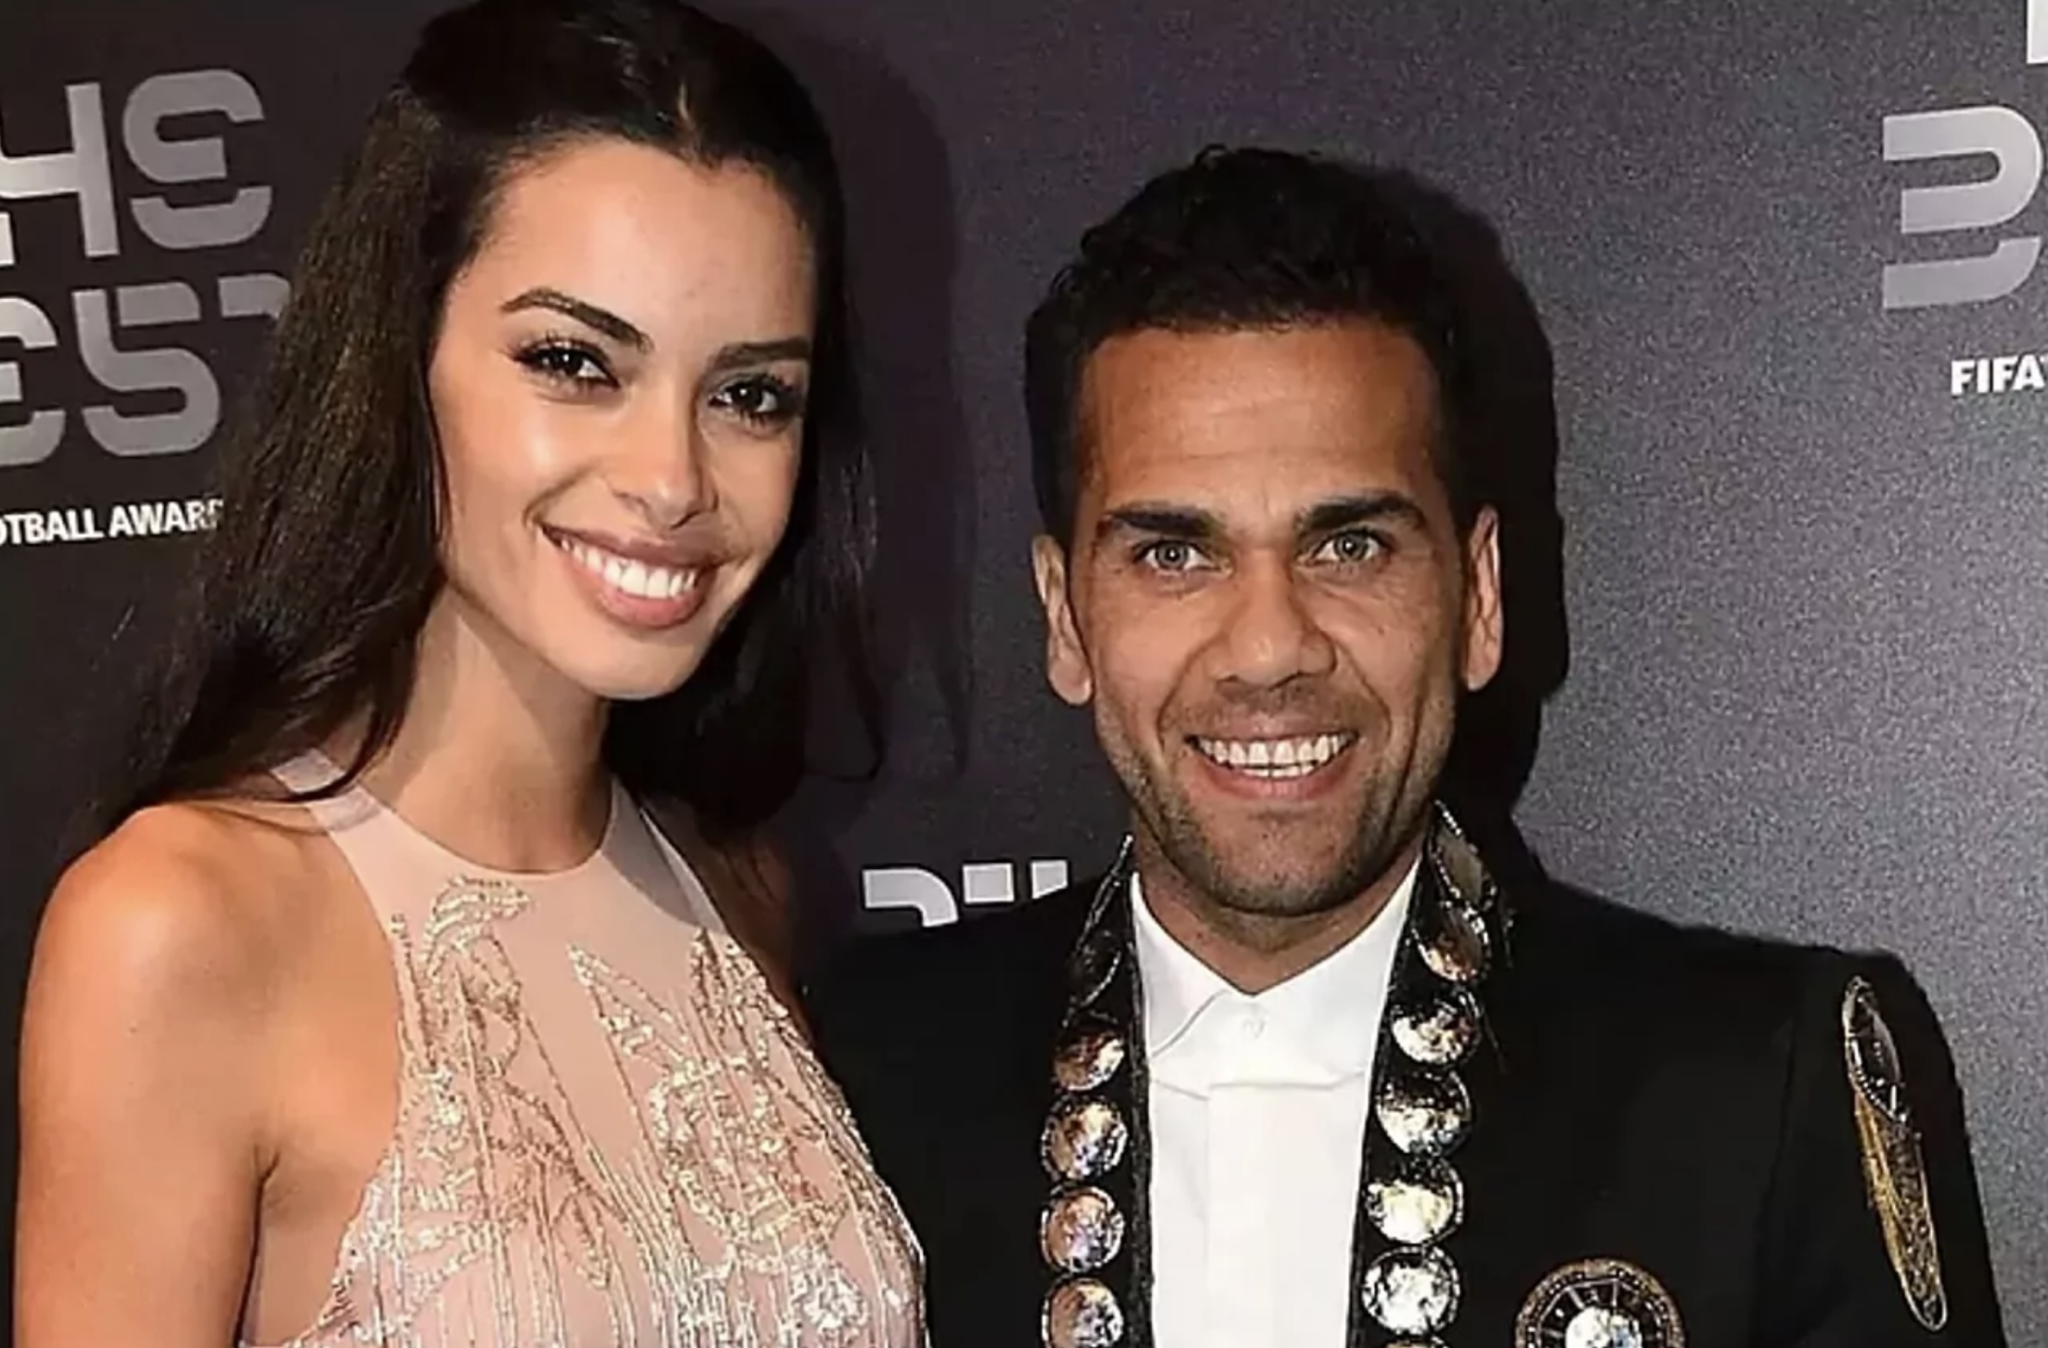 Joana Sanz and her heartbreaking farewell to Dani Alves: I close a stage of my life